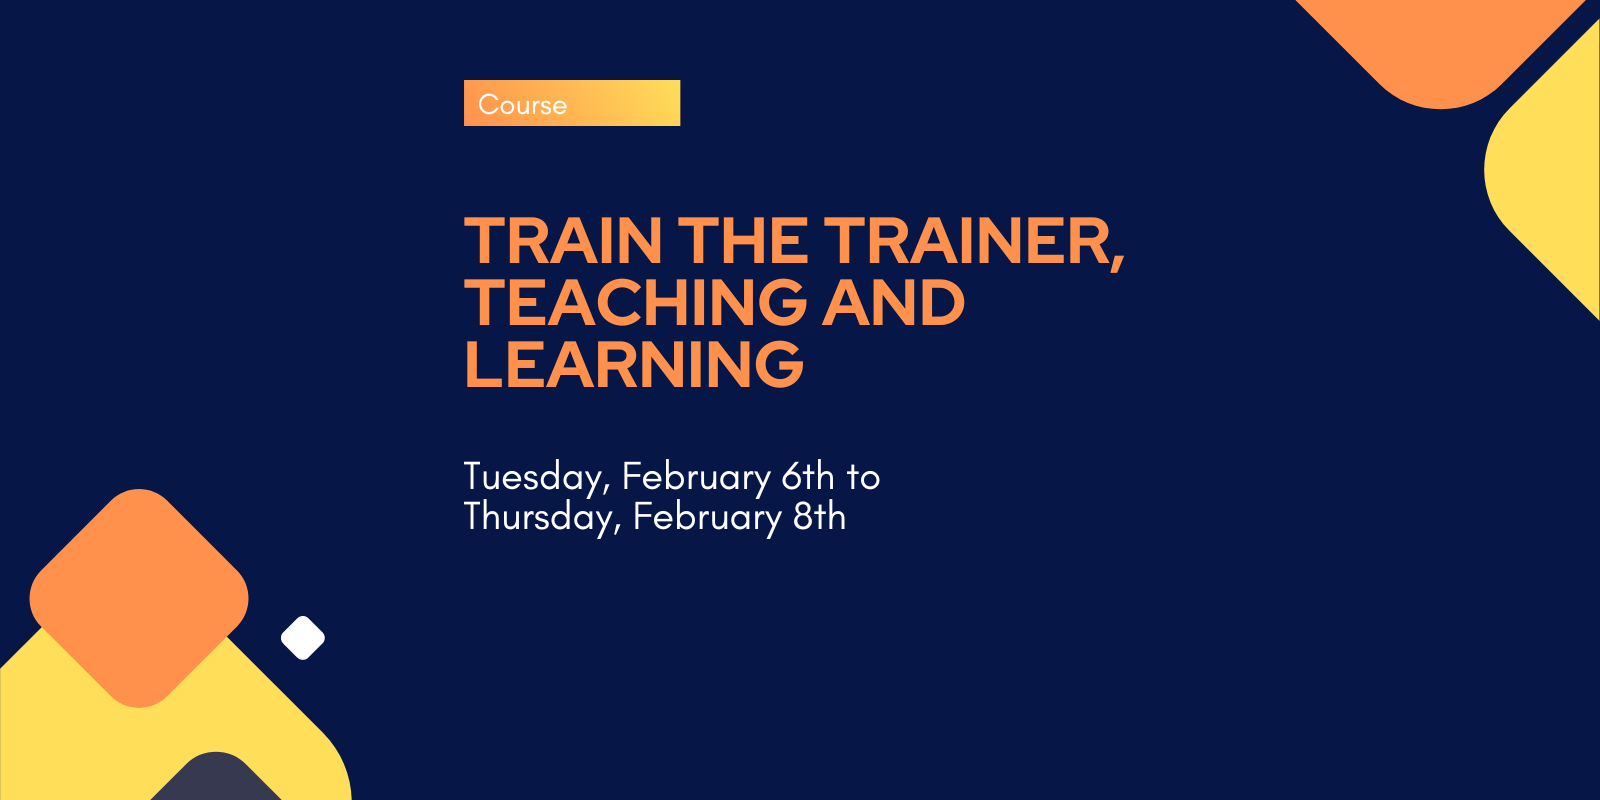 Train the Trainer, Teaching and Learning